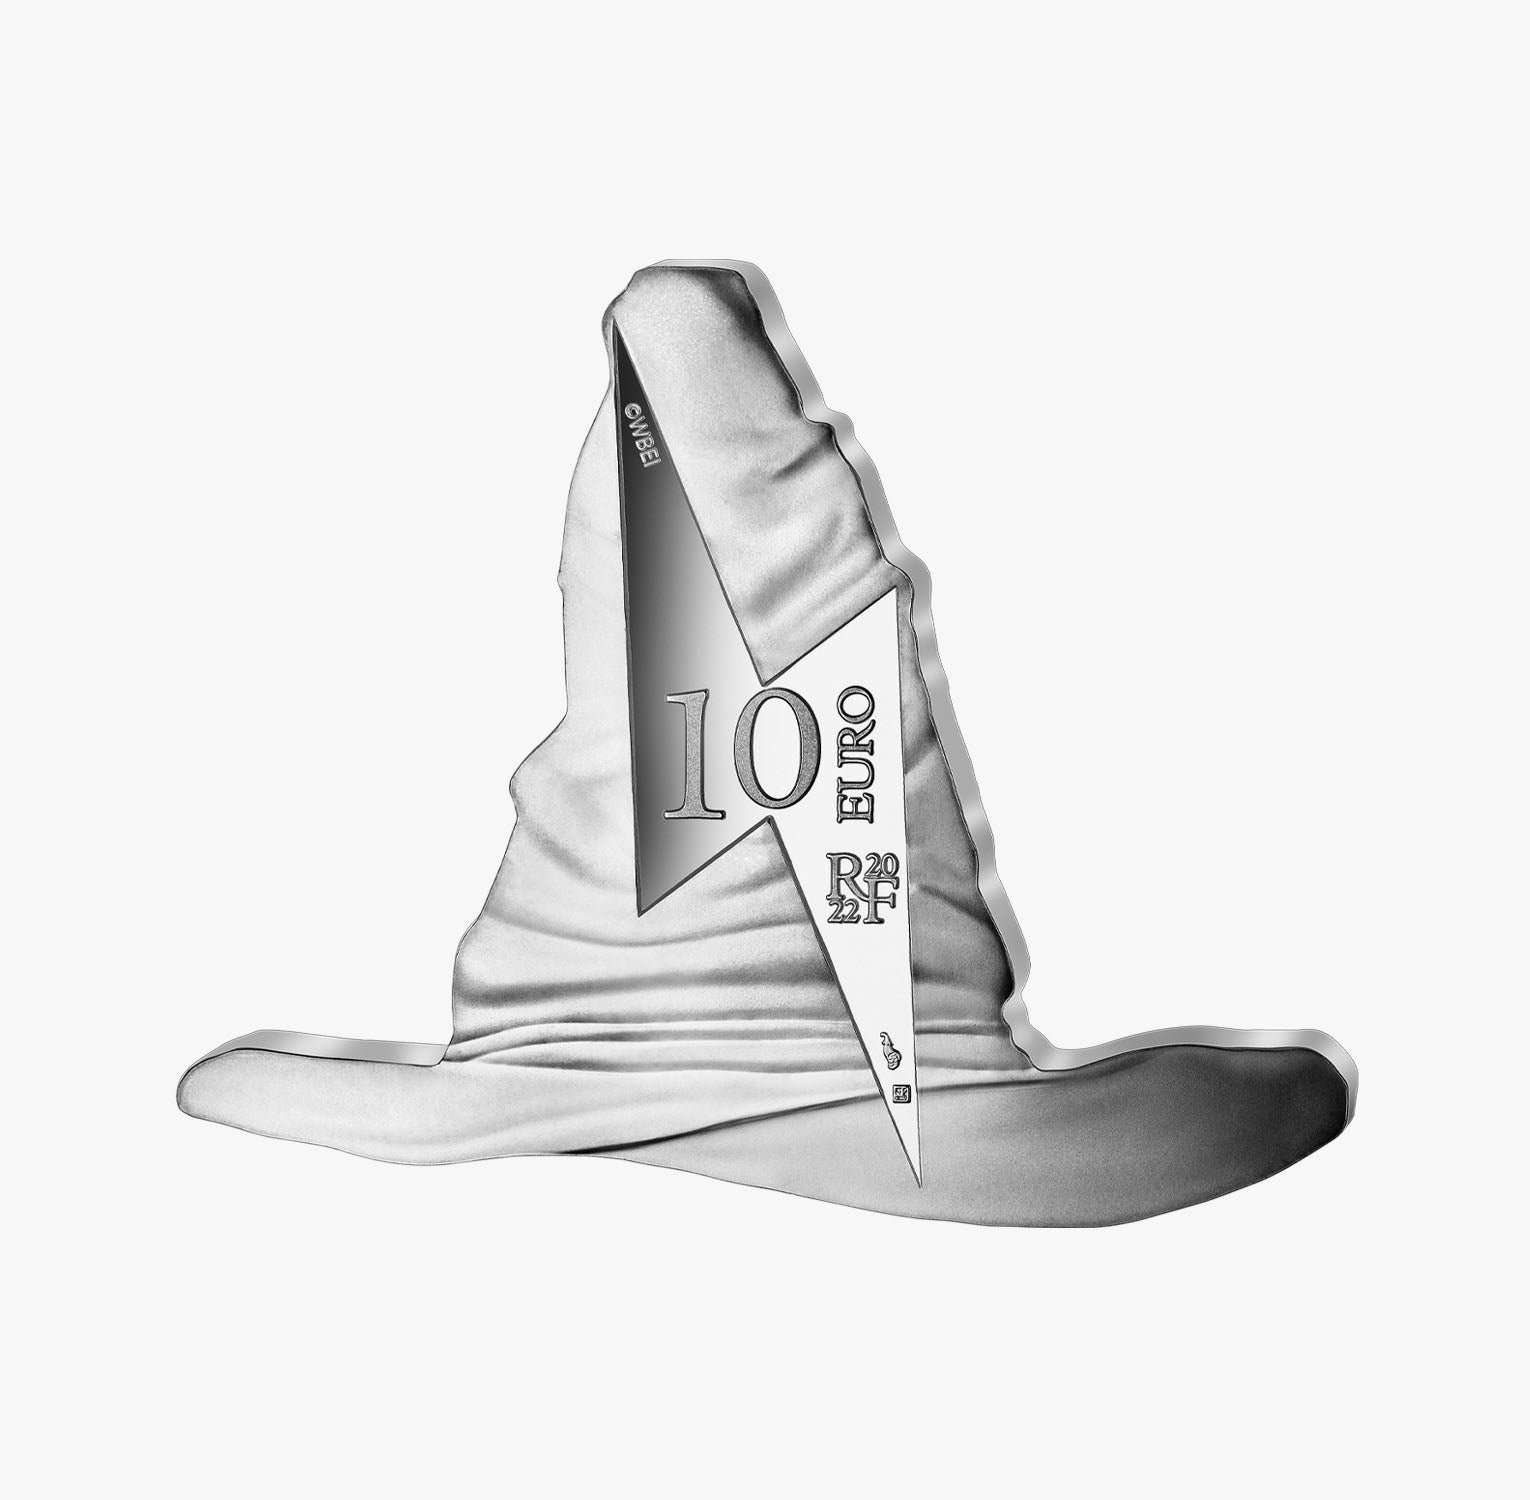 Harry Potter Sorting Hat Shaped €10 Silver Proof Coin